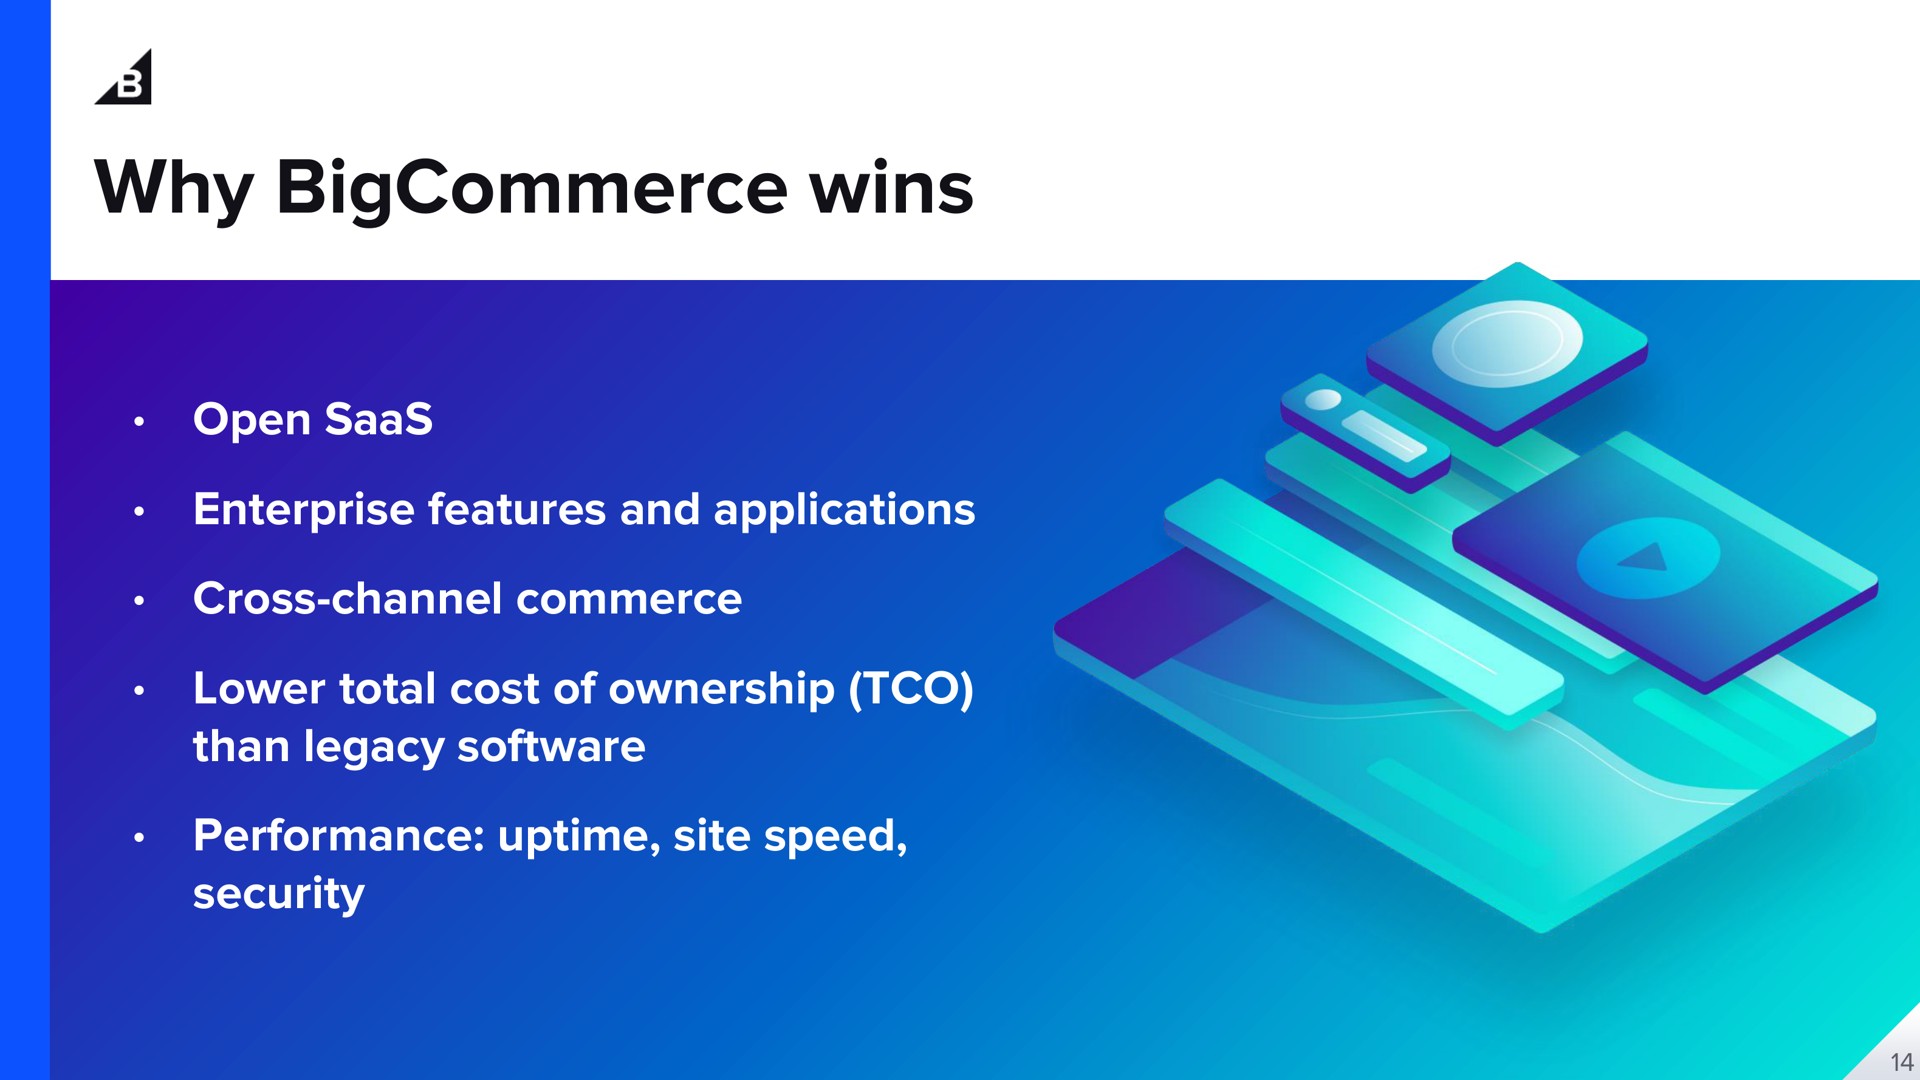 why wins open enterprise features and applications cross channel commerce lower total cost of ownership than legacy performance site speed security a | BigCommerce